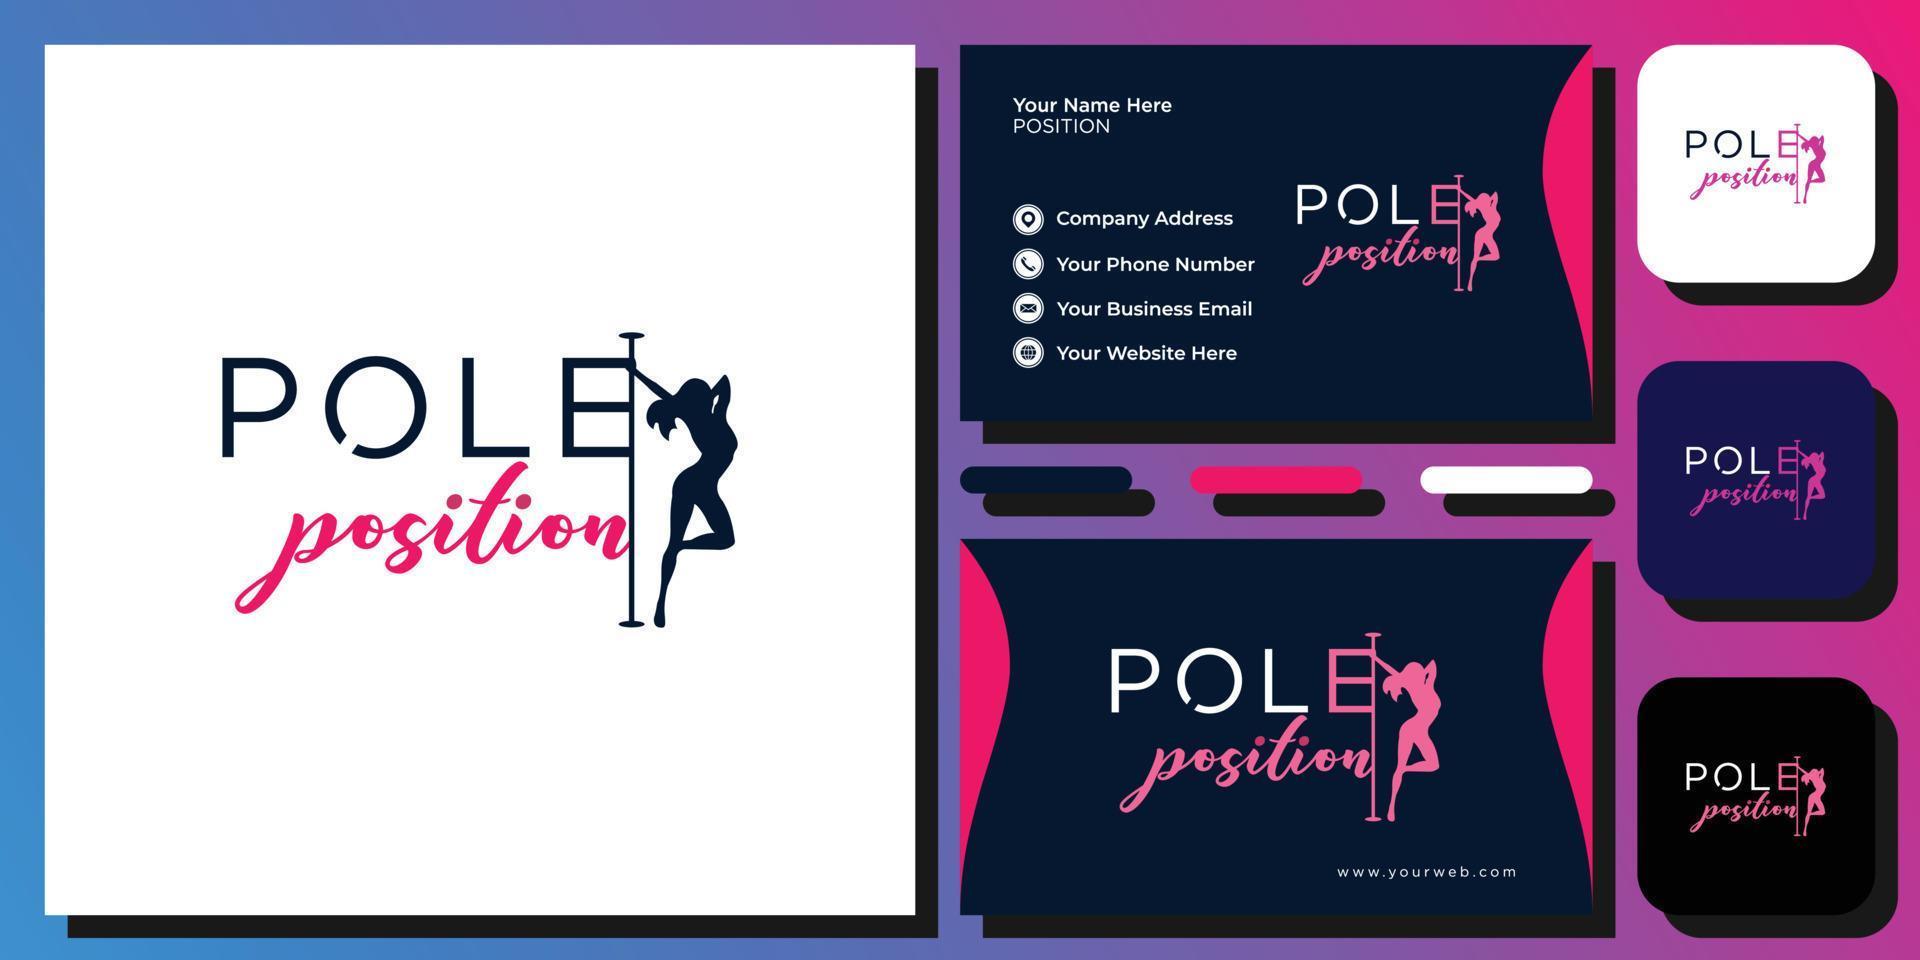 Pole Position wordmark aerial art dance exotic with business card template vector